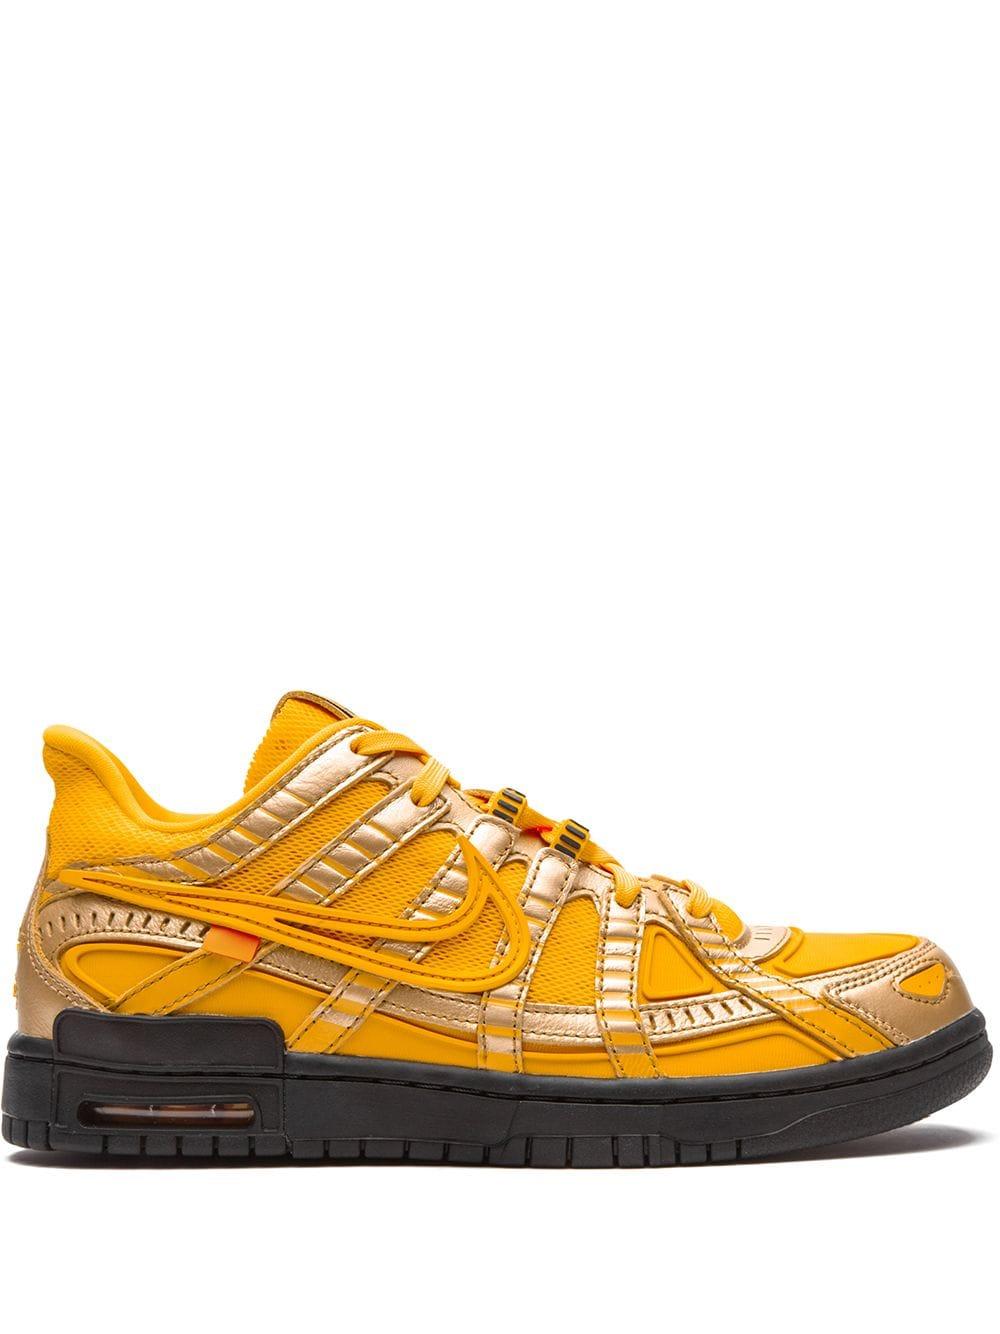 NIKE X OFF-WHITE Air Rubber Dunk Sneakers in Yellow for Men | Lyst